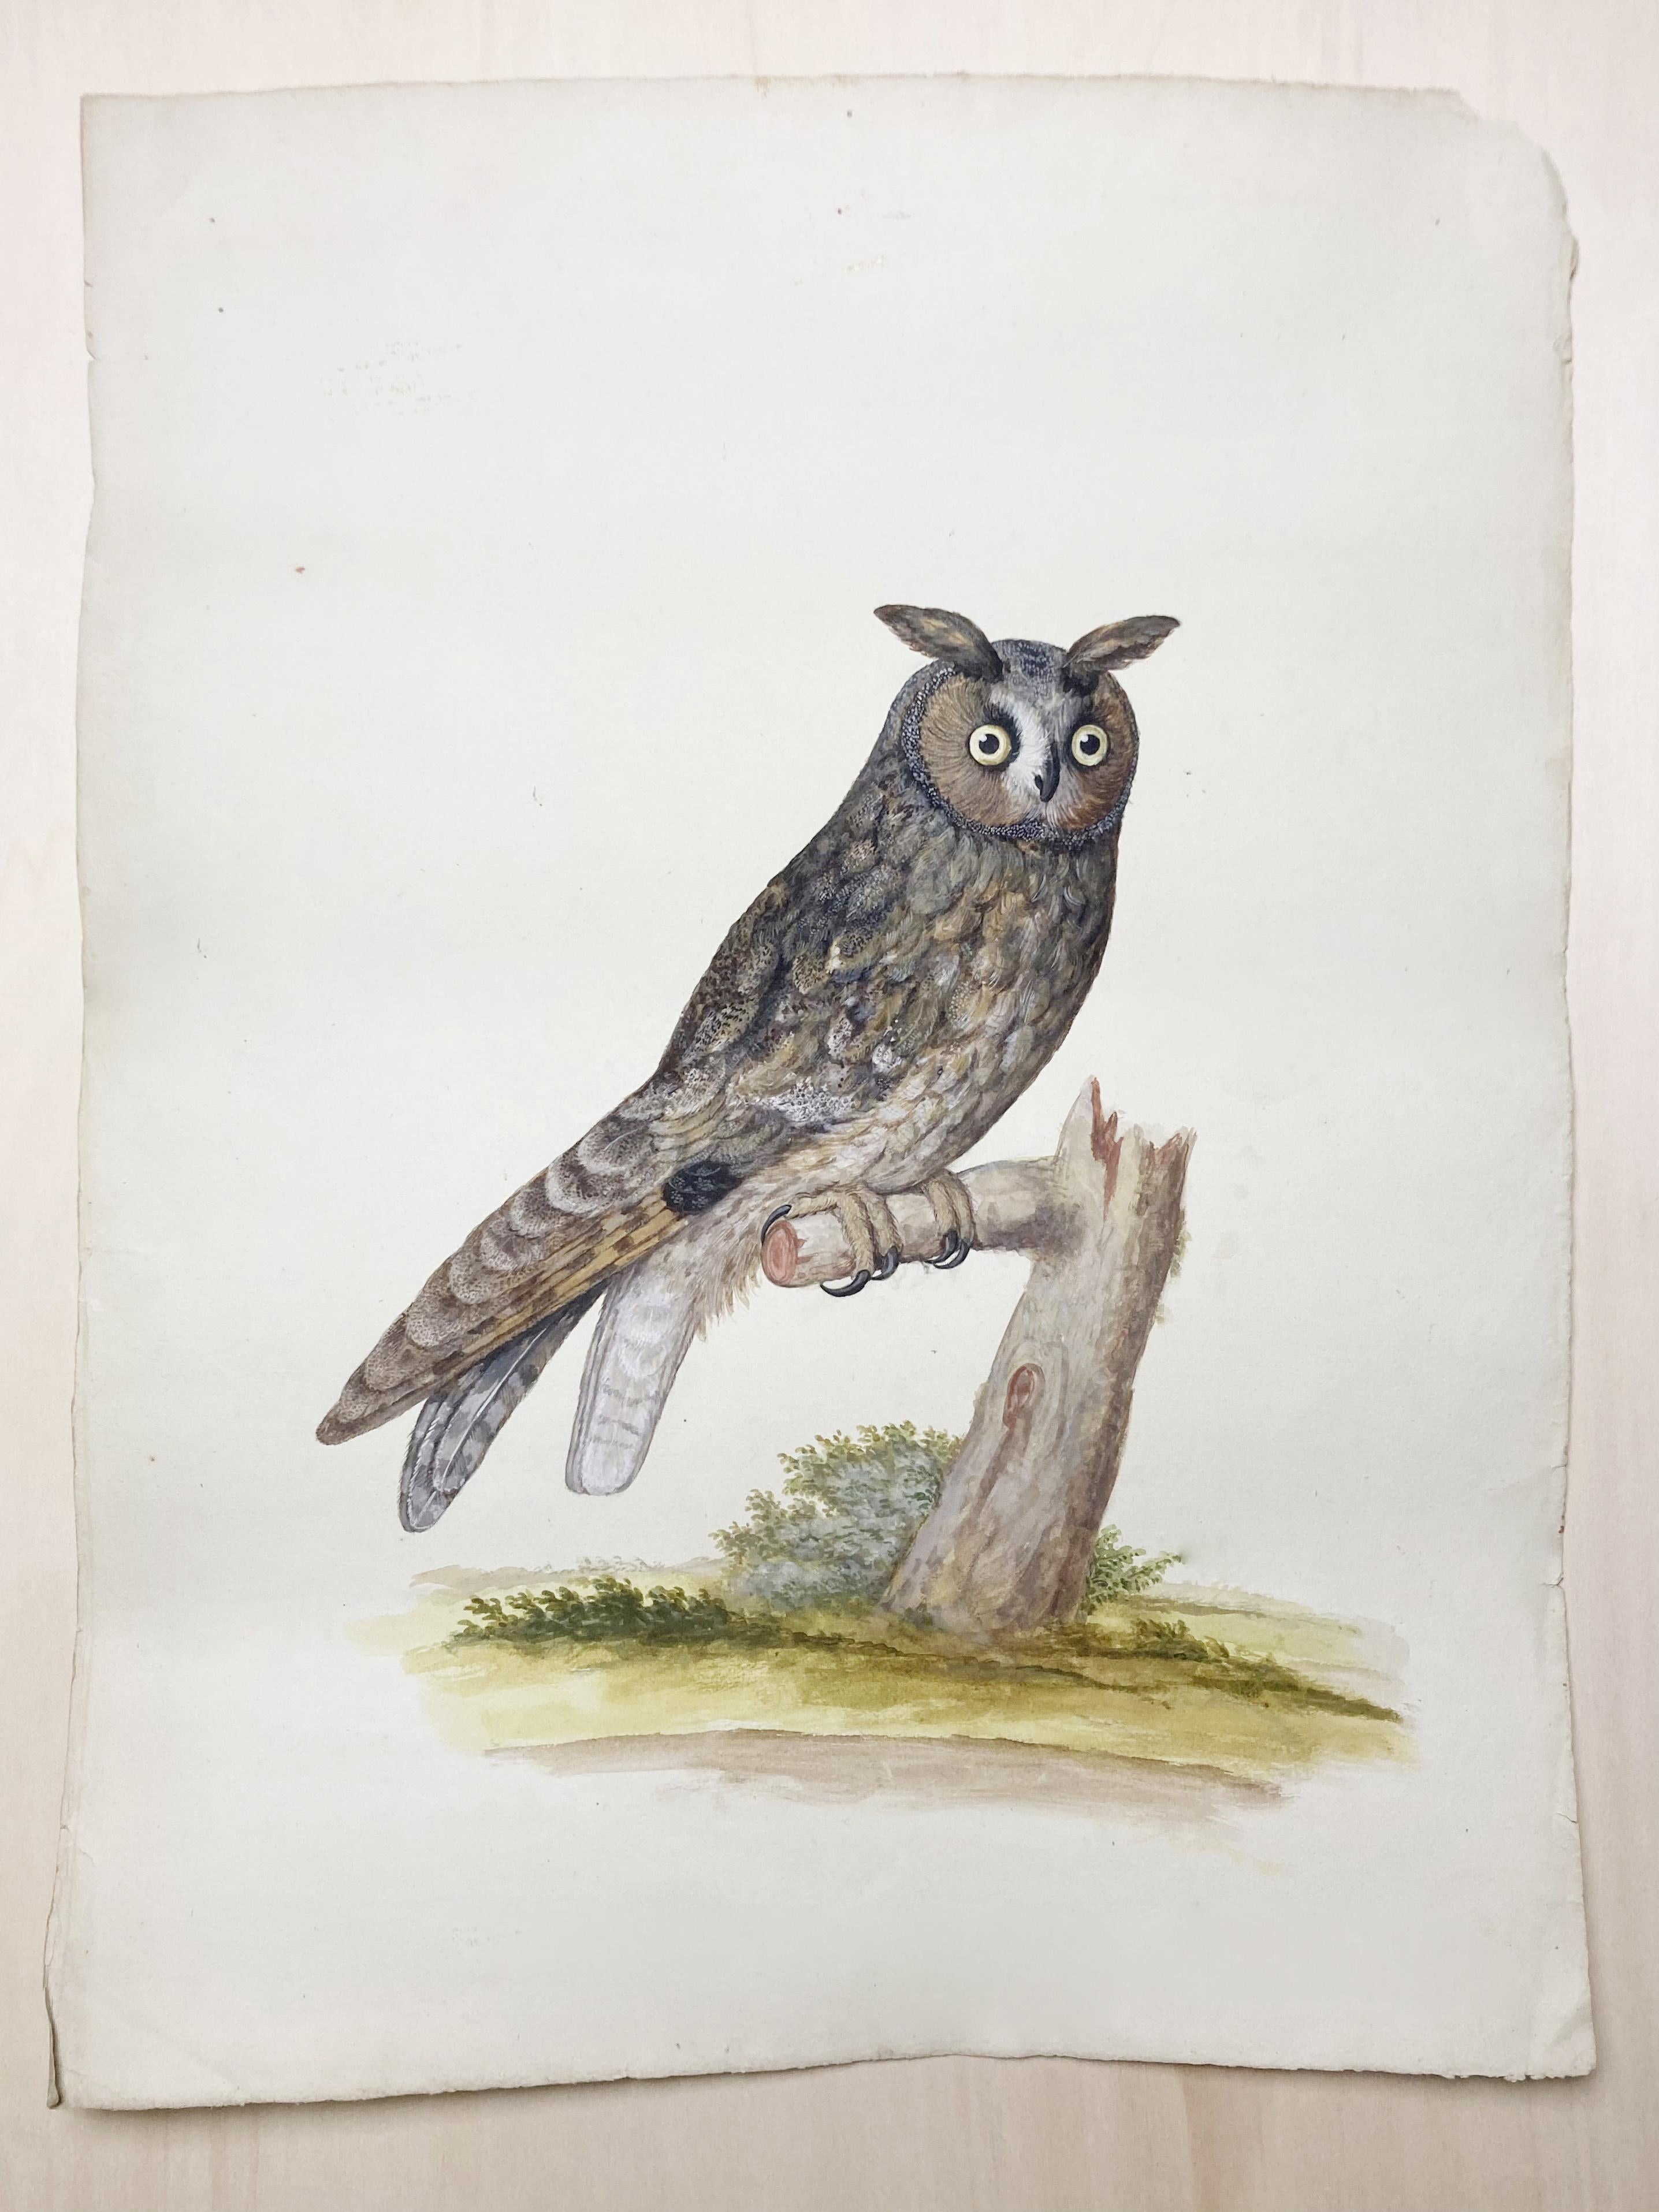 Peter Paillou Animal Art - Wildlife painting of sitting owl by british Enlightenment painter 